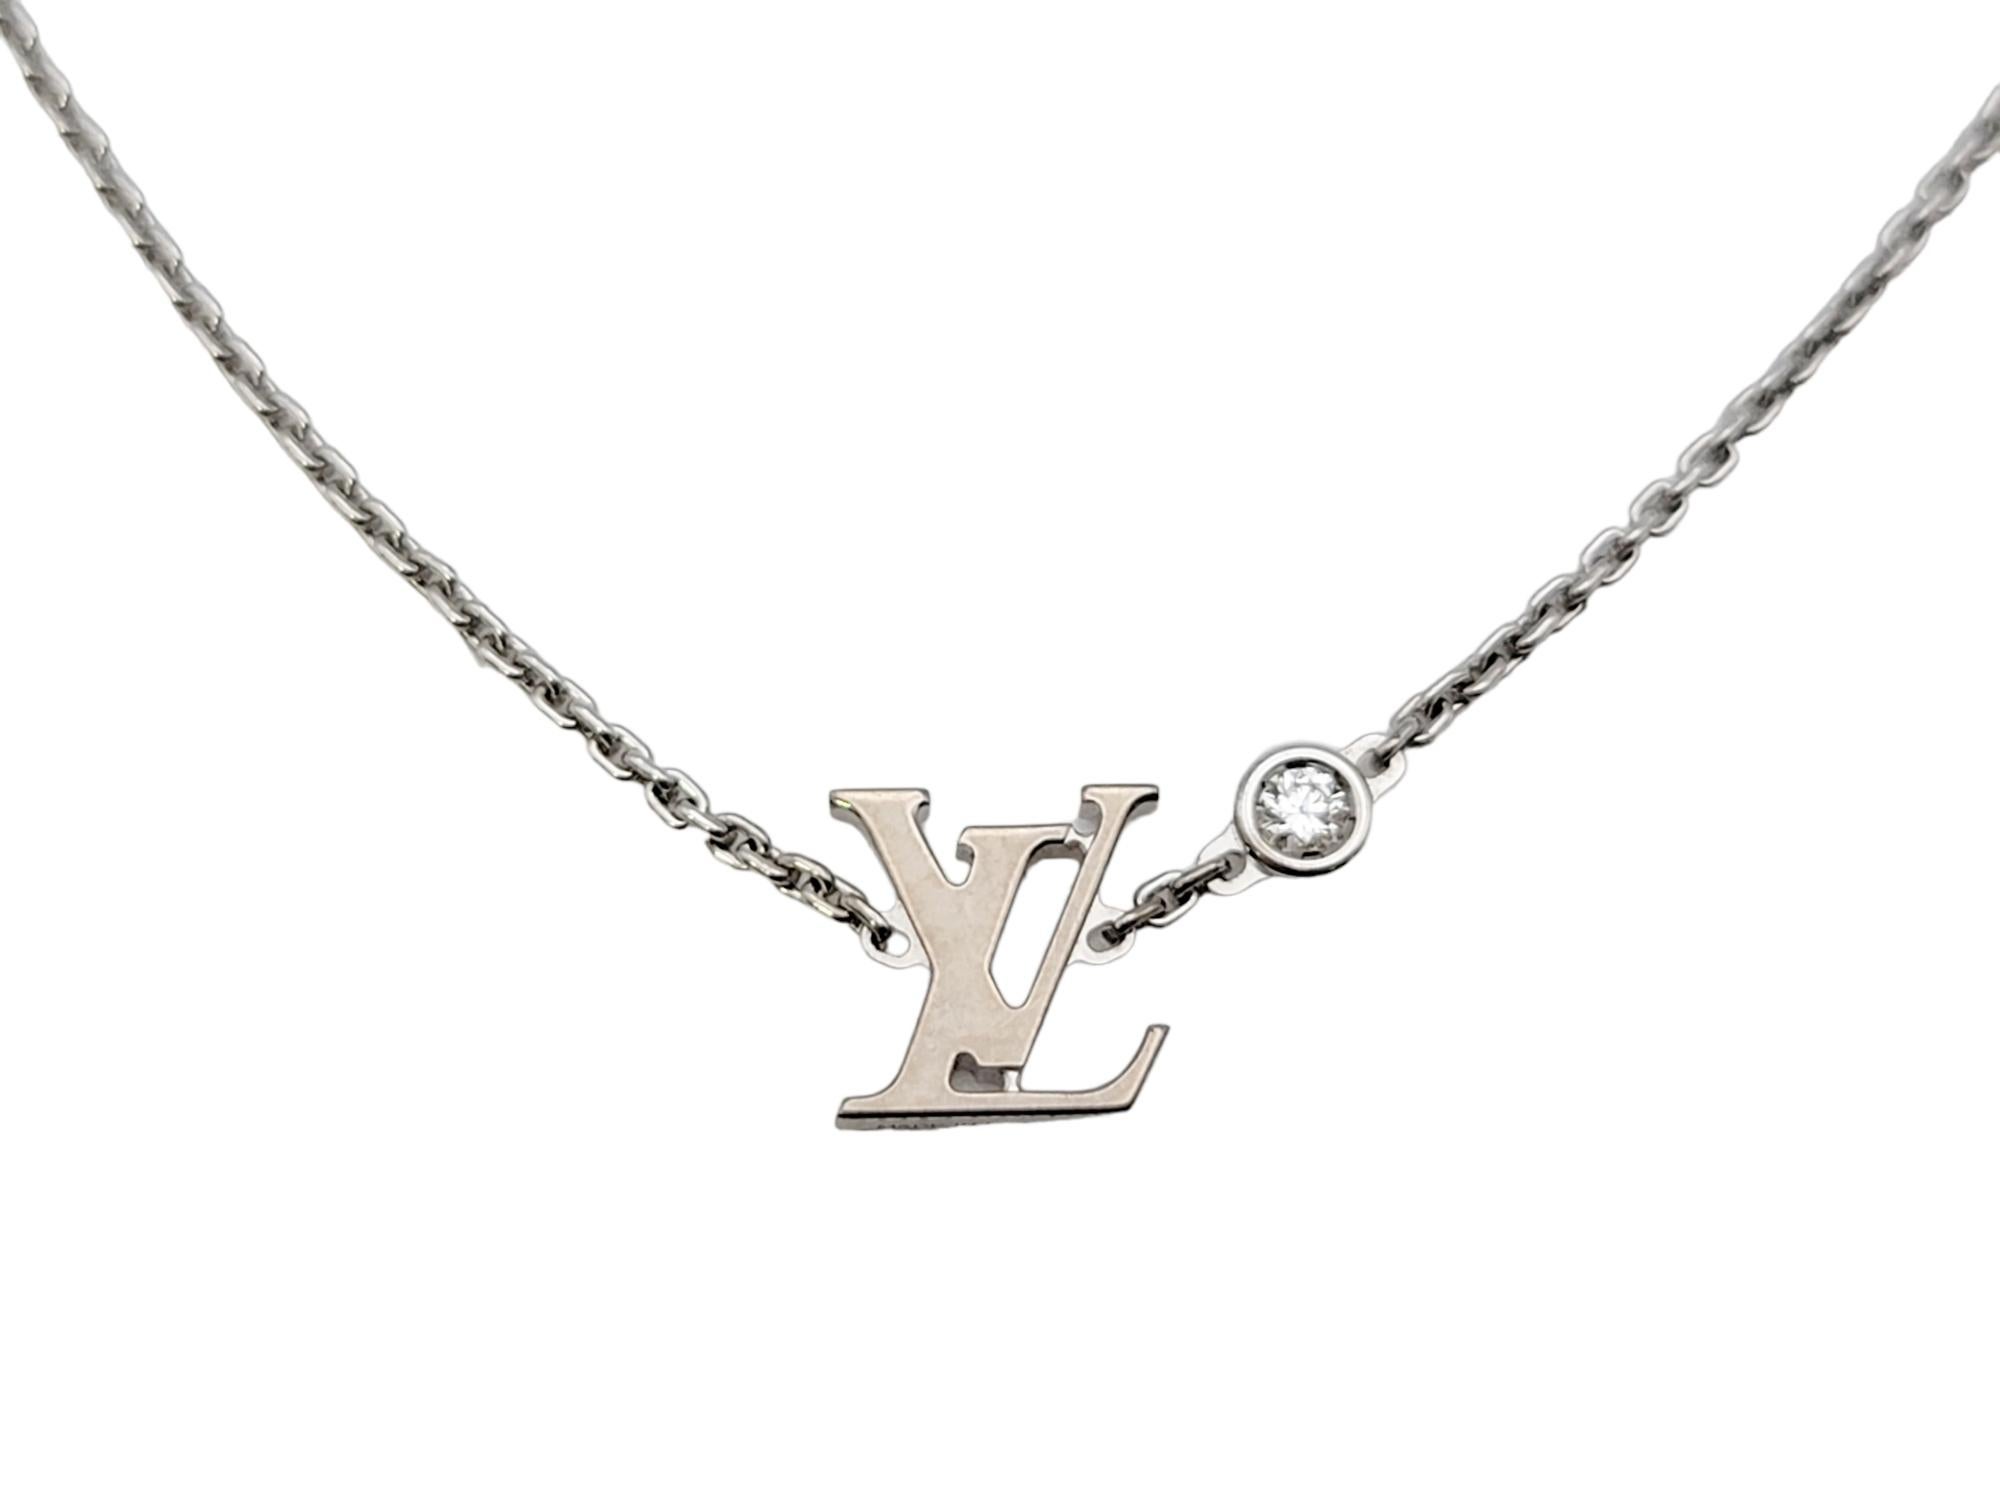 Louis Vuitton LV Volt Pendant in 18k yellow gold 0.03 ctw Silvery